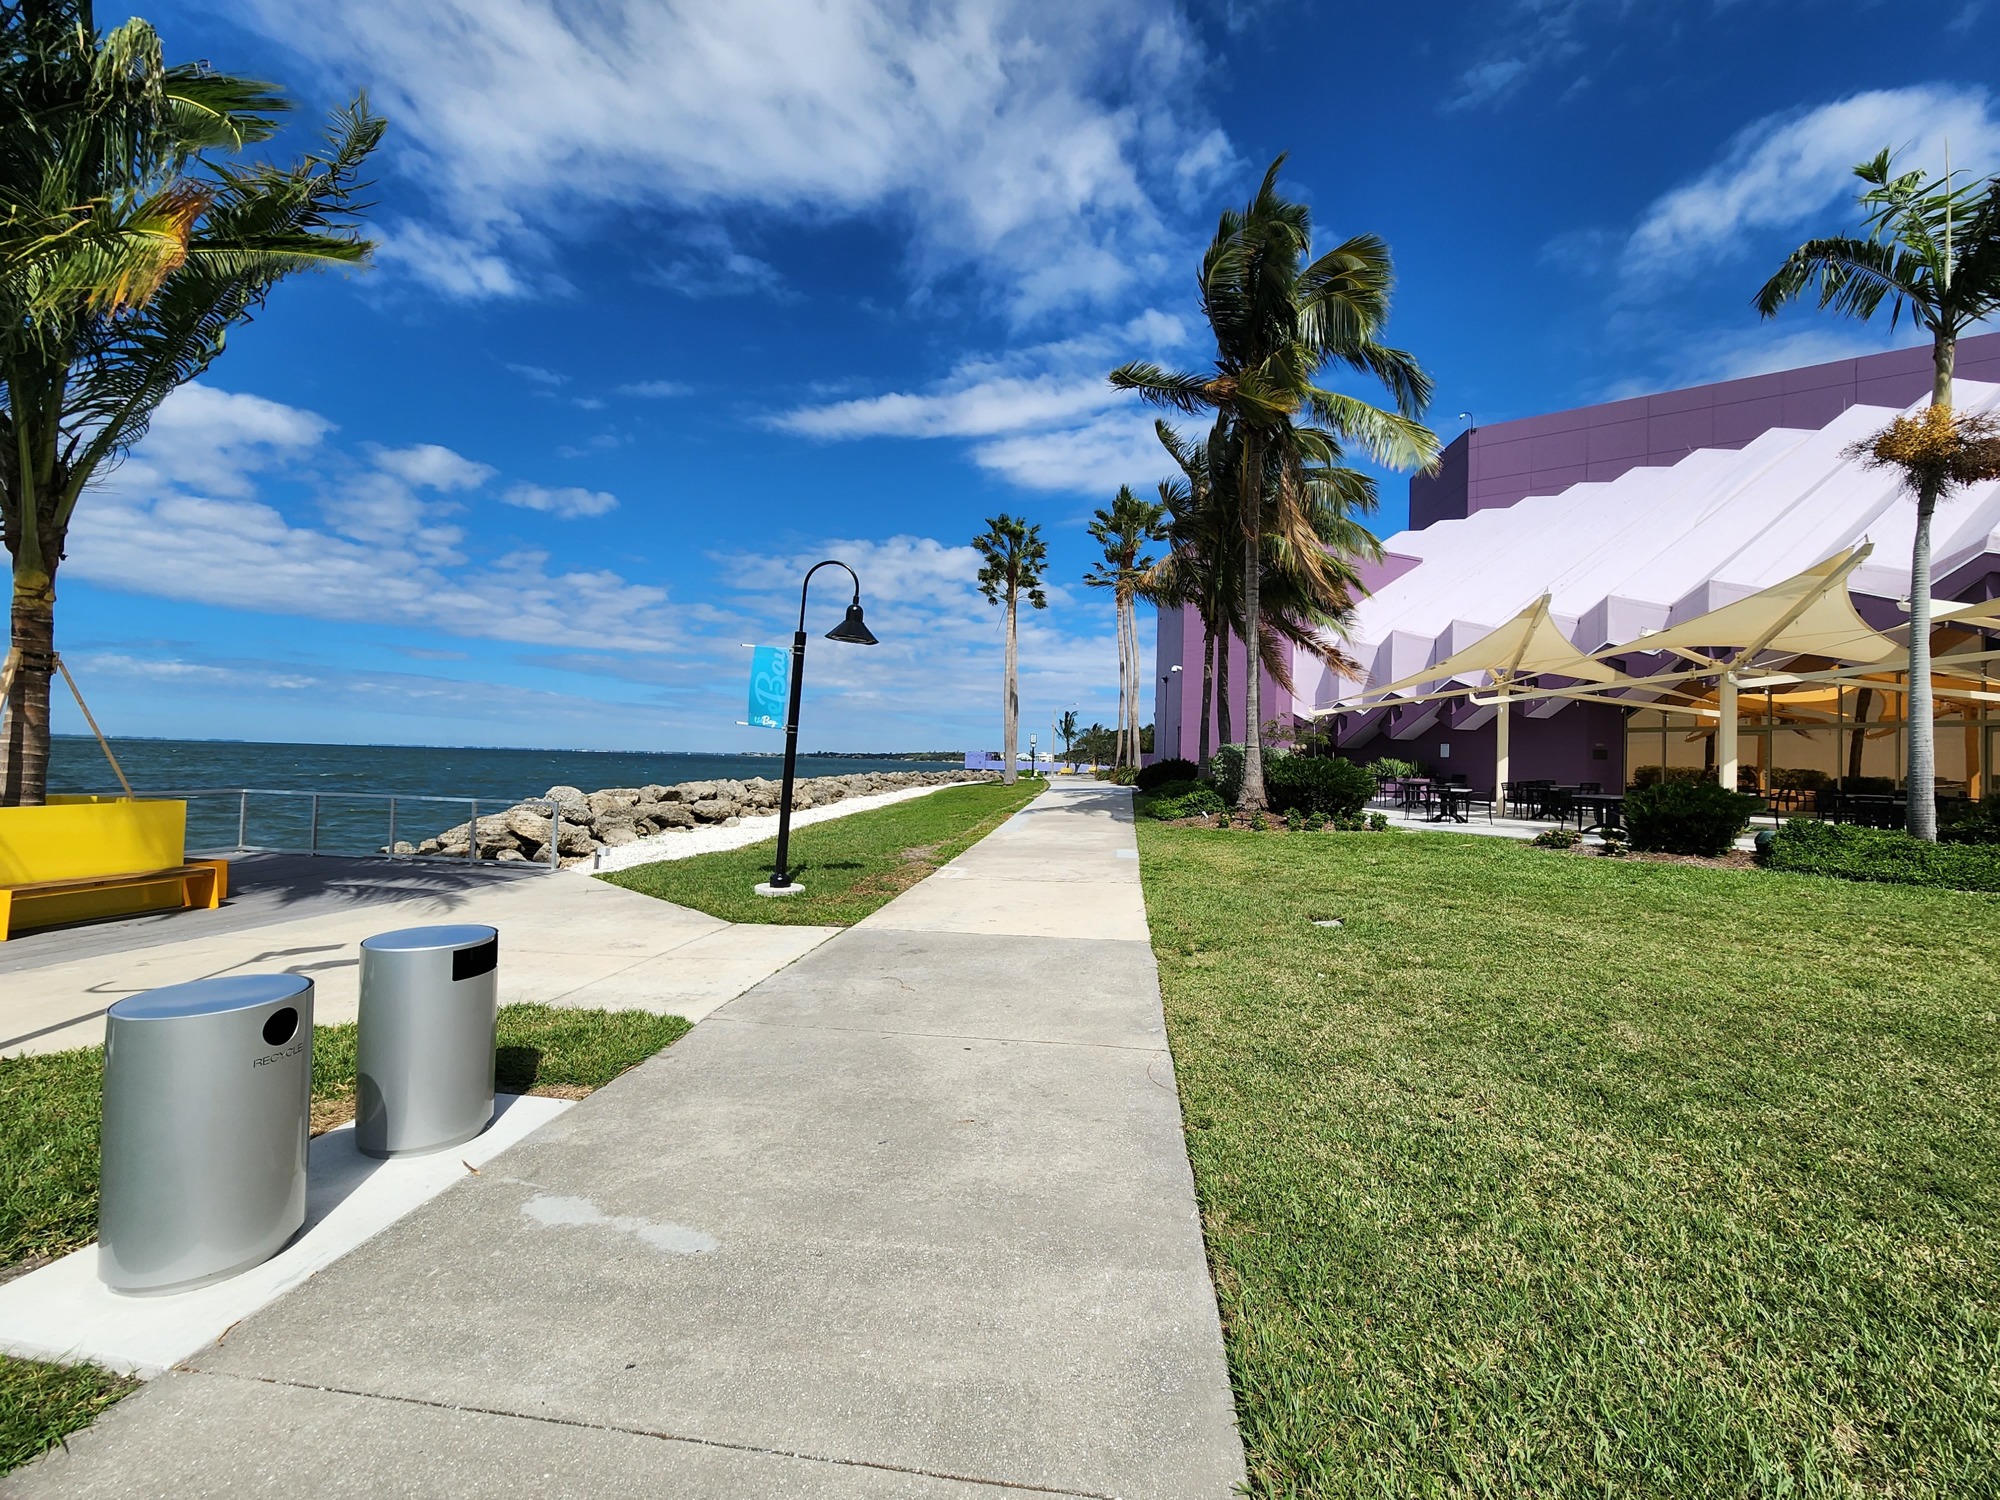 The bayfront location of the Van Wezel Performing Arts Hall is both impressive and a hazard. The new Sarasota Performing  Arts Center will be built away from the what FEMA defines as the wave action zone. (Andrew Warfield)